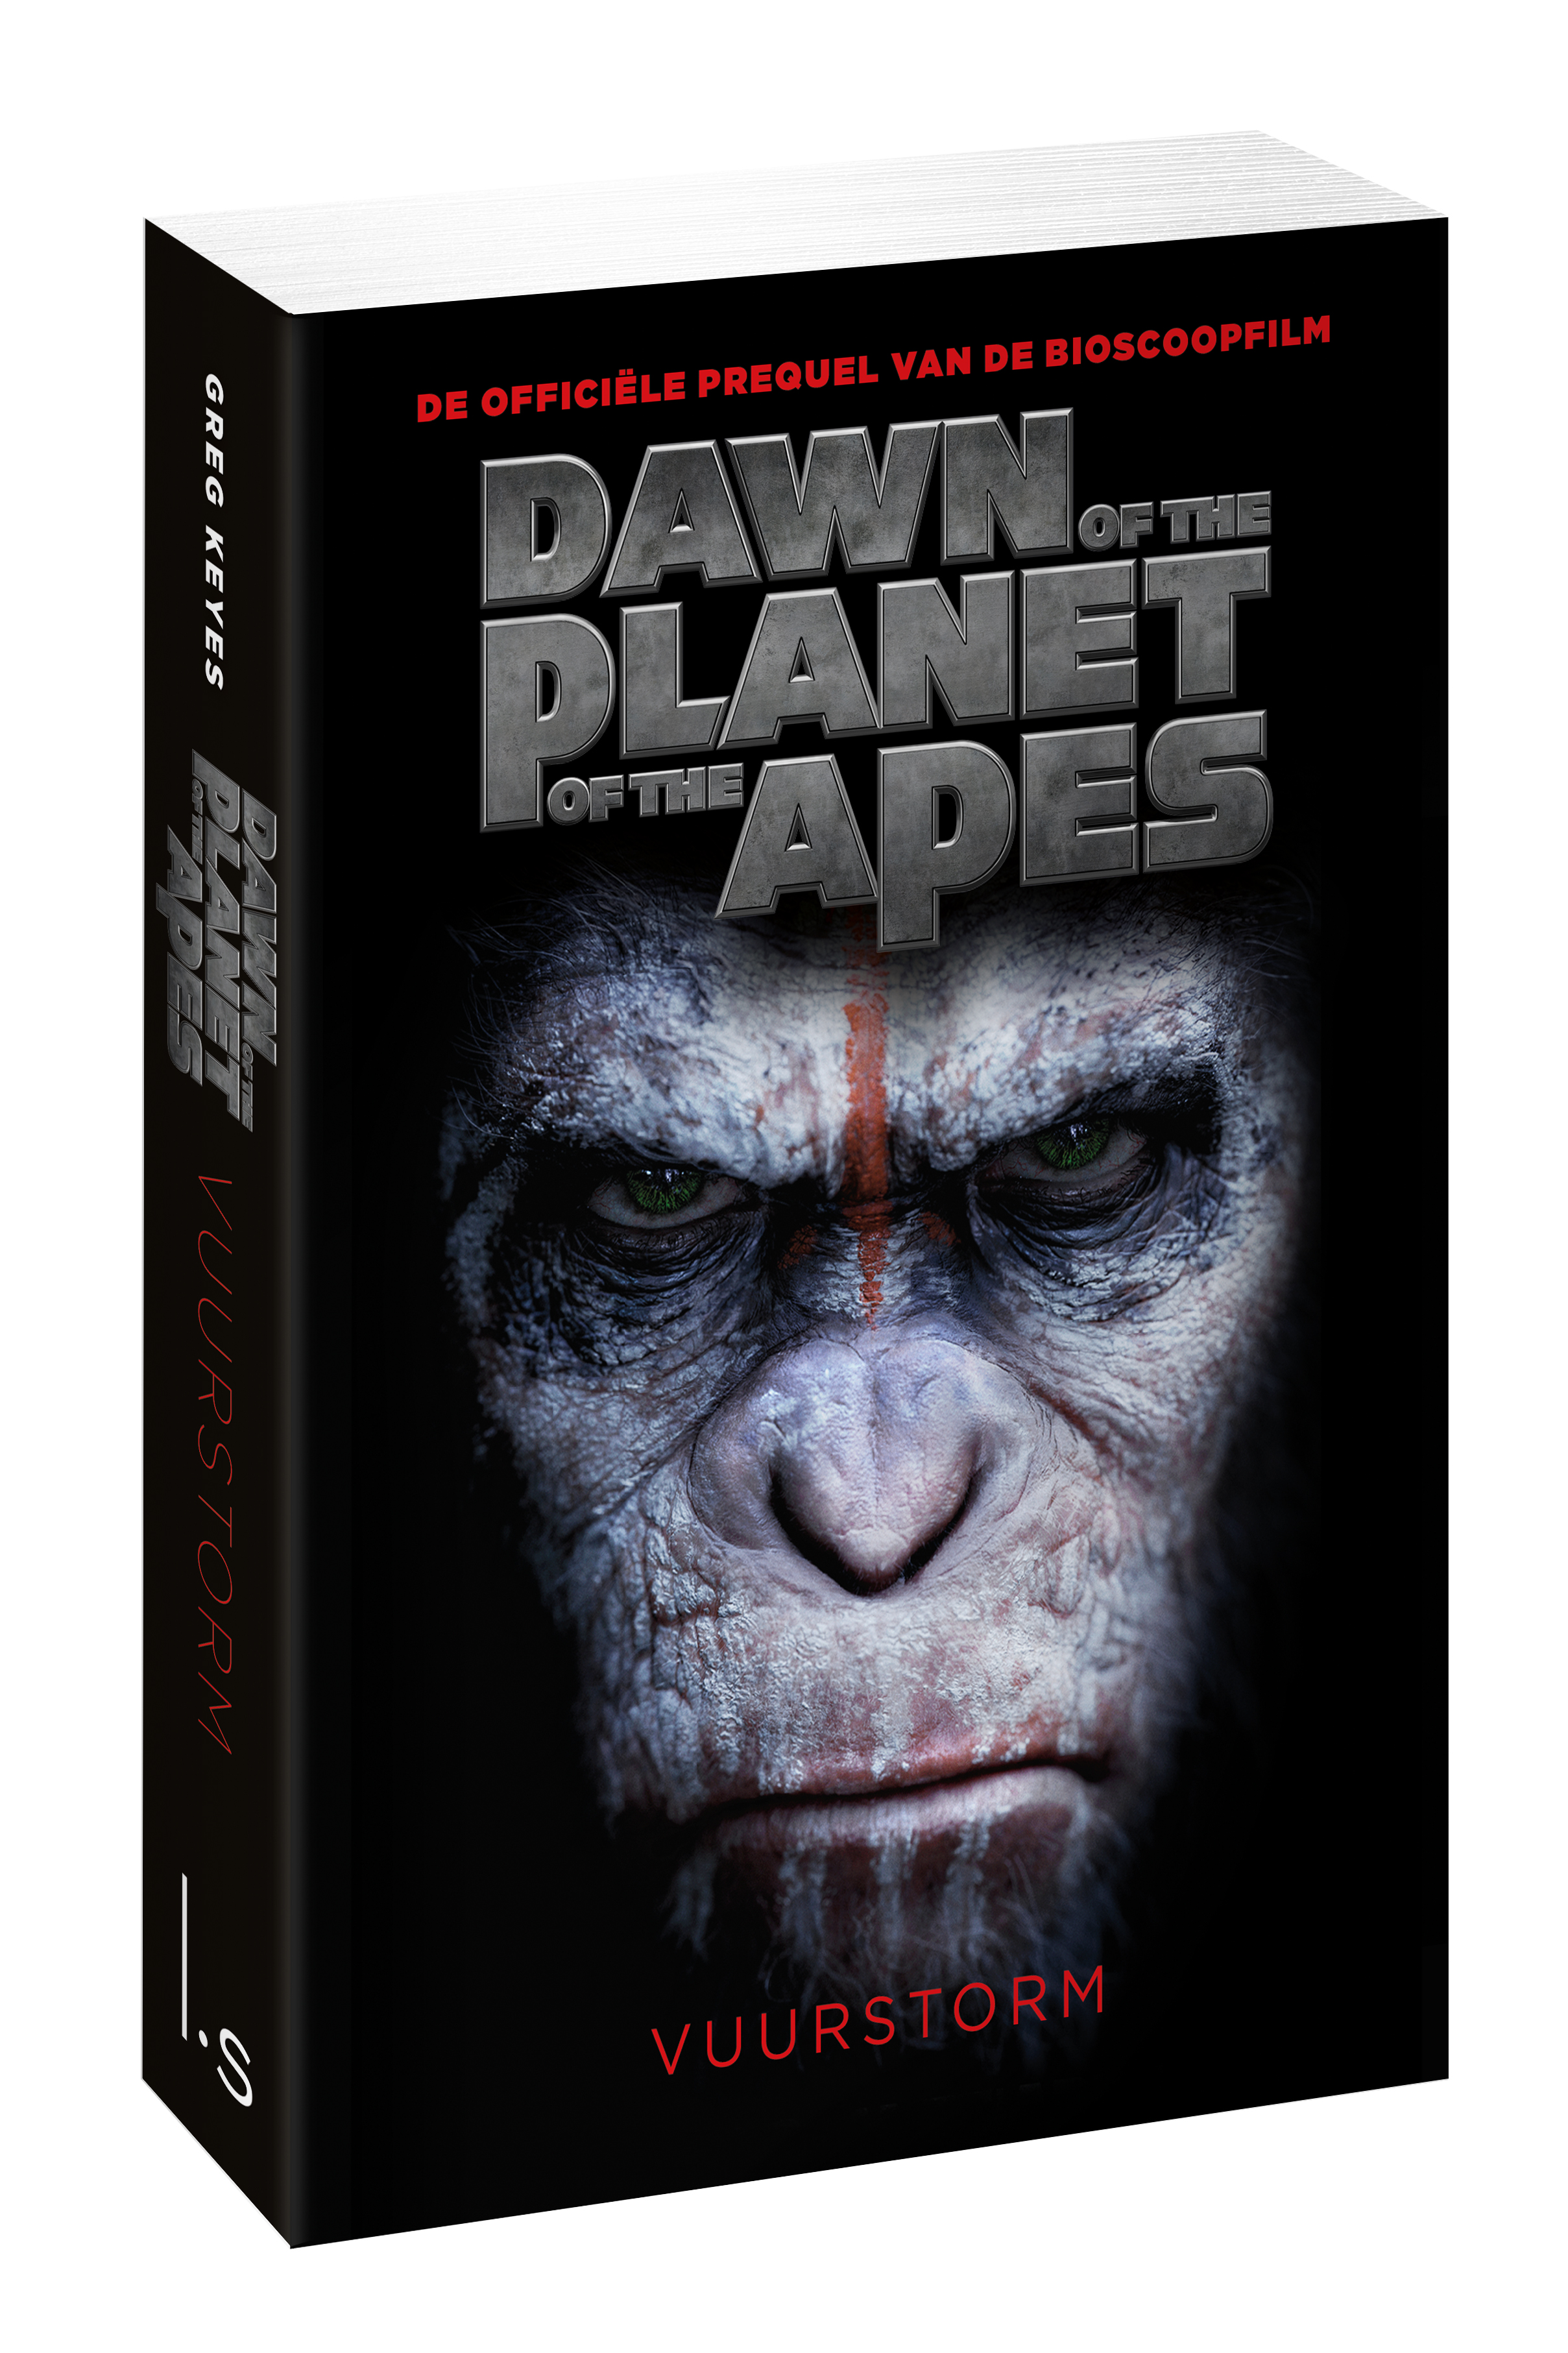 Dawn of the planet of the apes - Vuurstorm